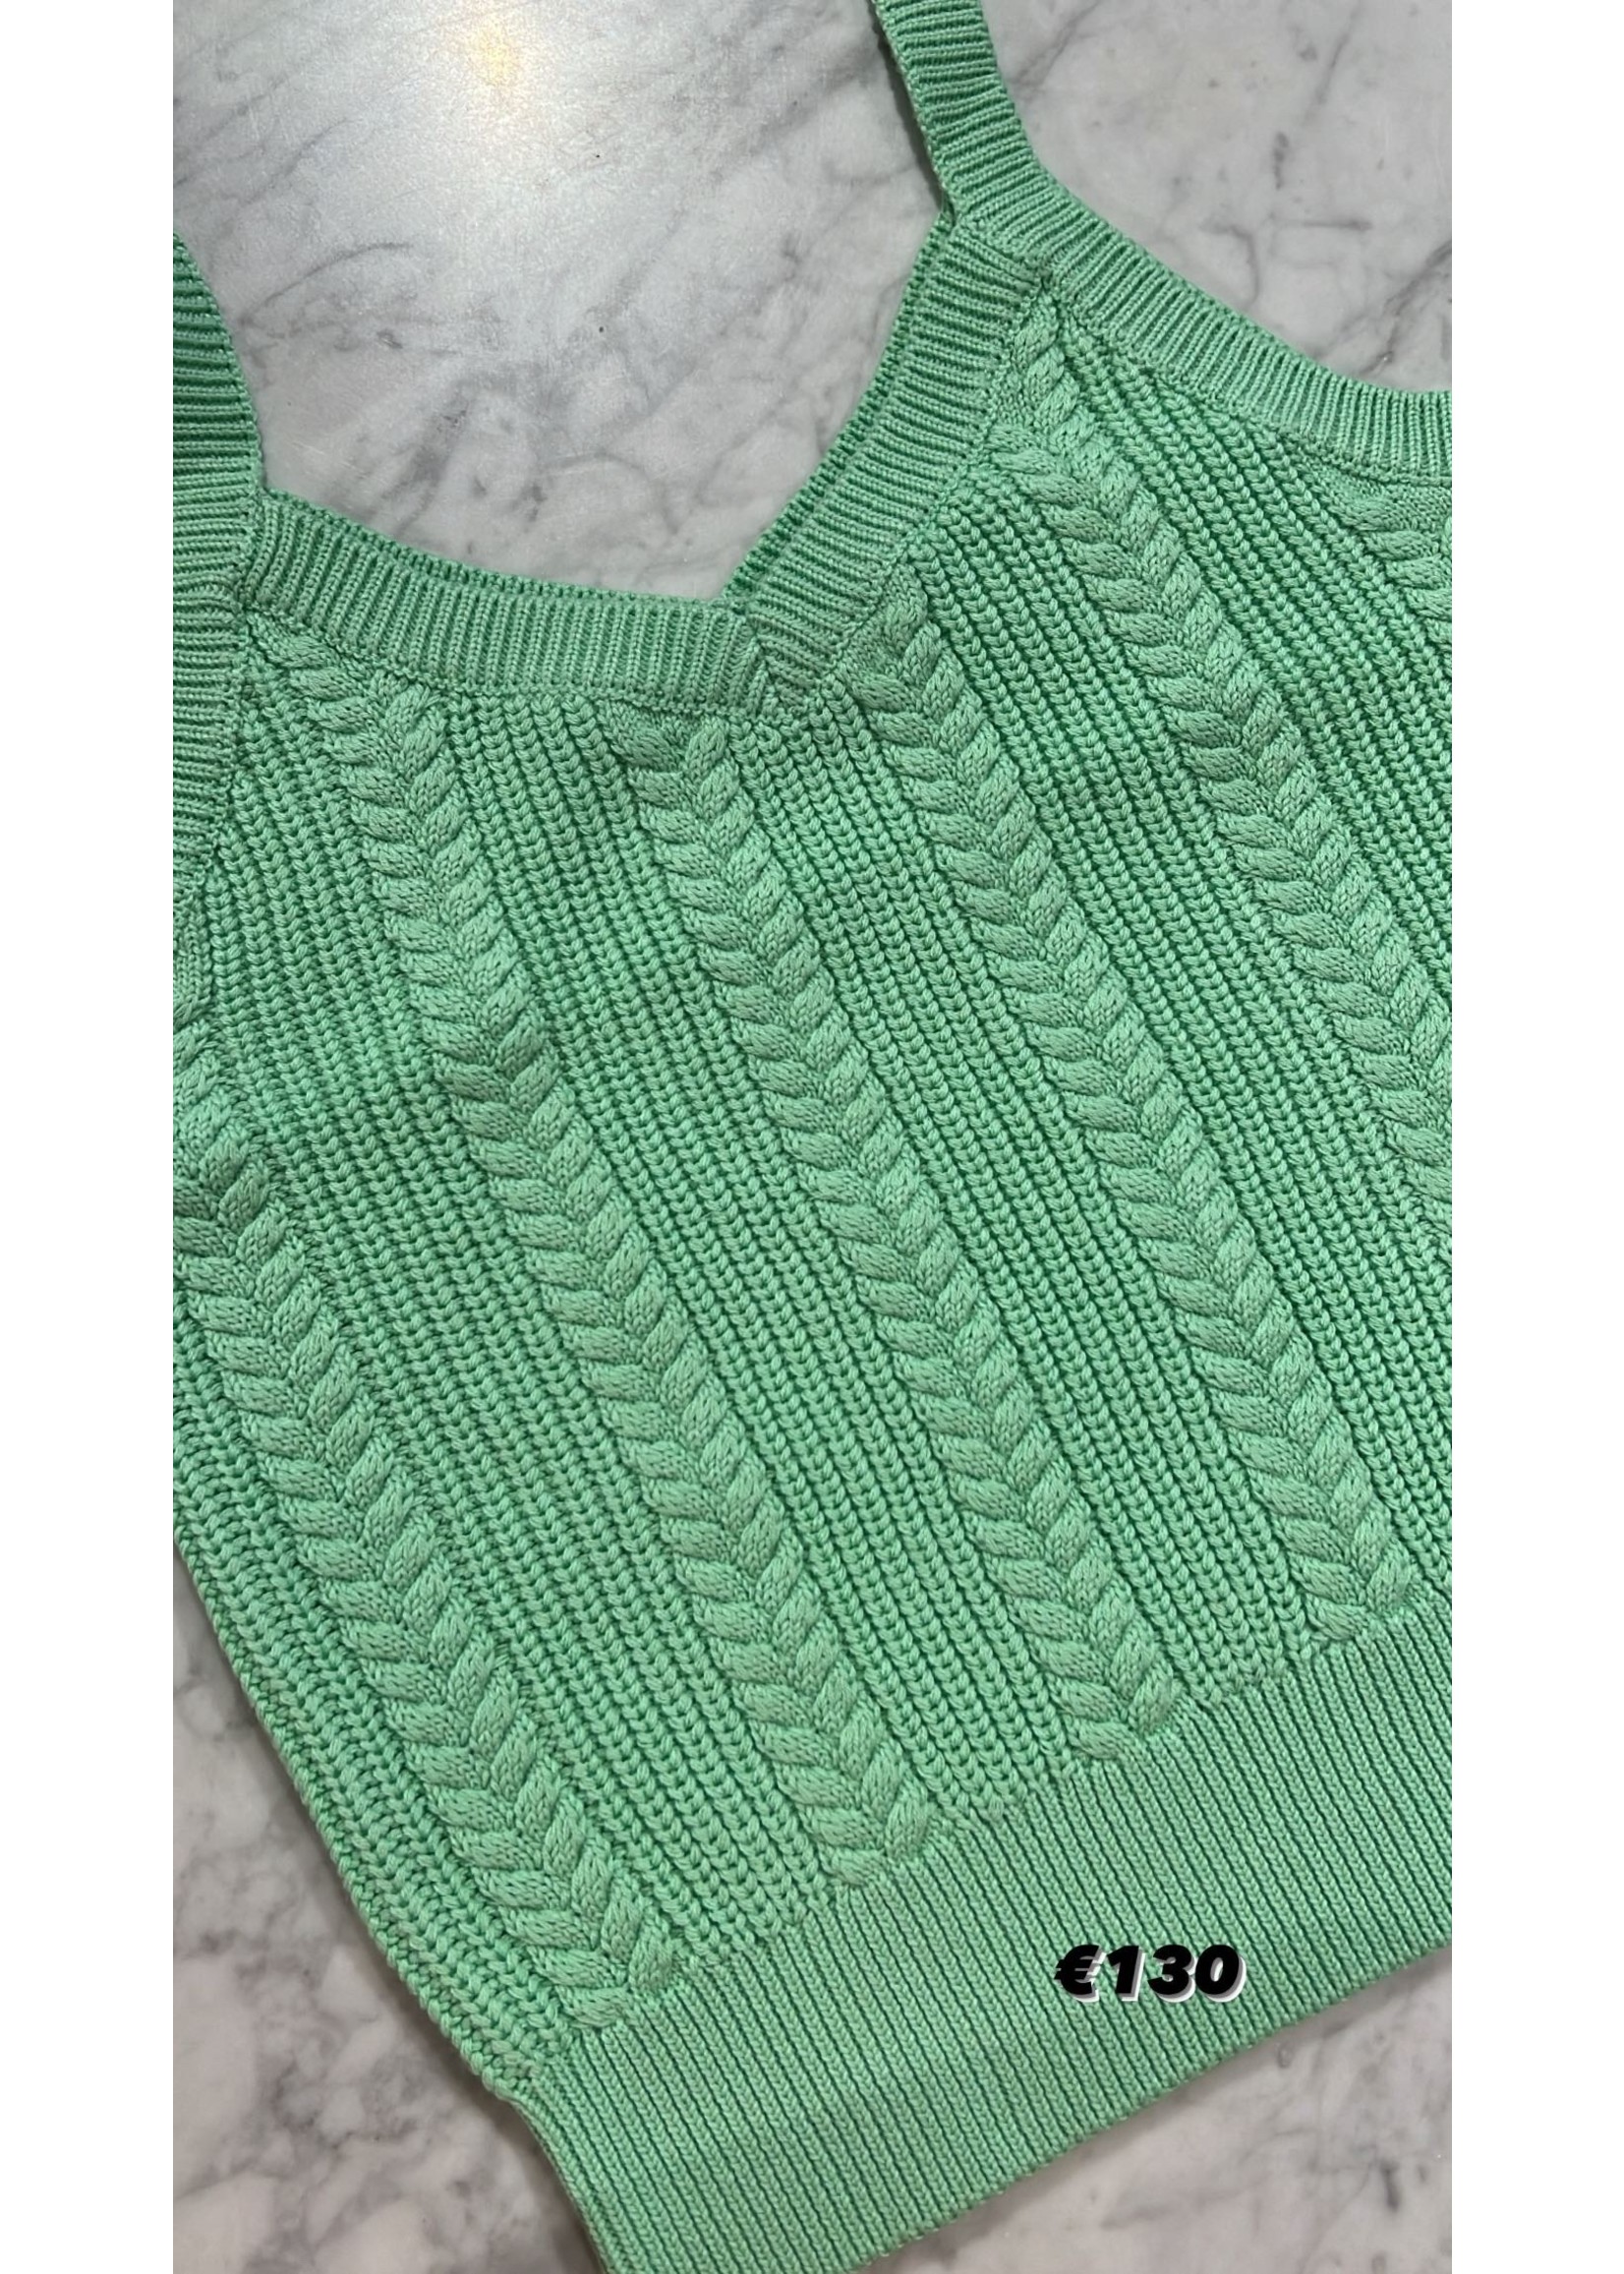 KNIT TOP